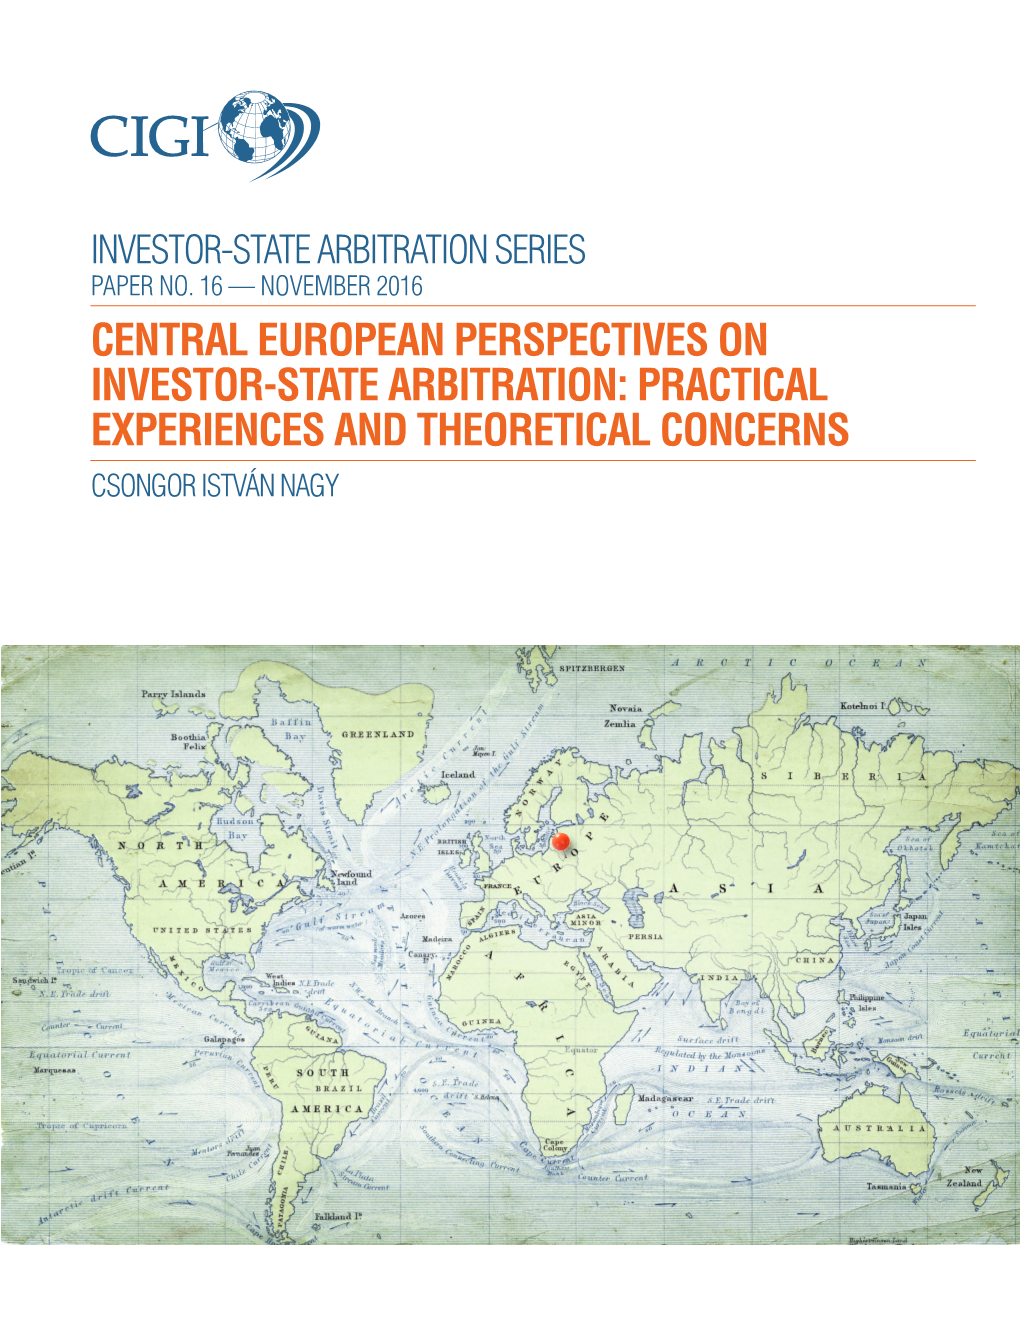 Central European Perspectives on Investor-State Arbitration: Practical Experiences and Theoretical Concerns Csongor István Nagy